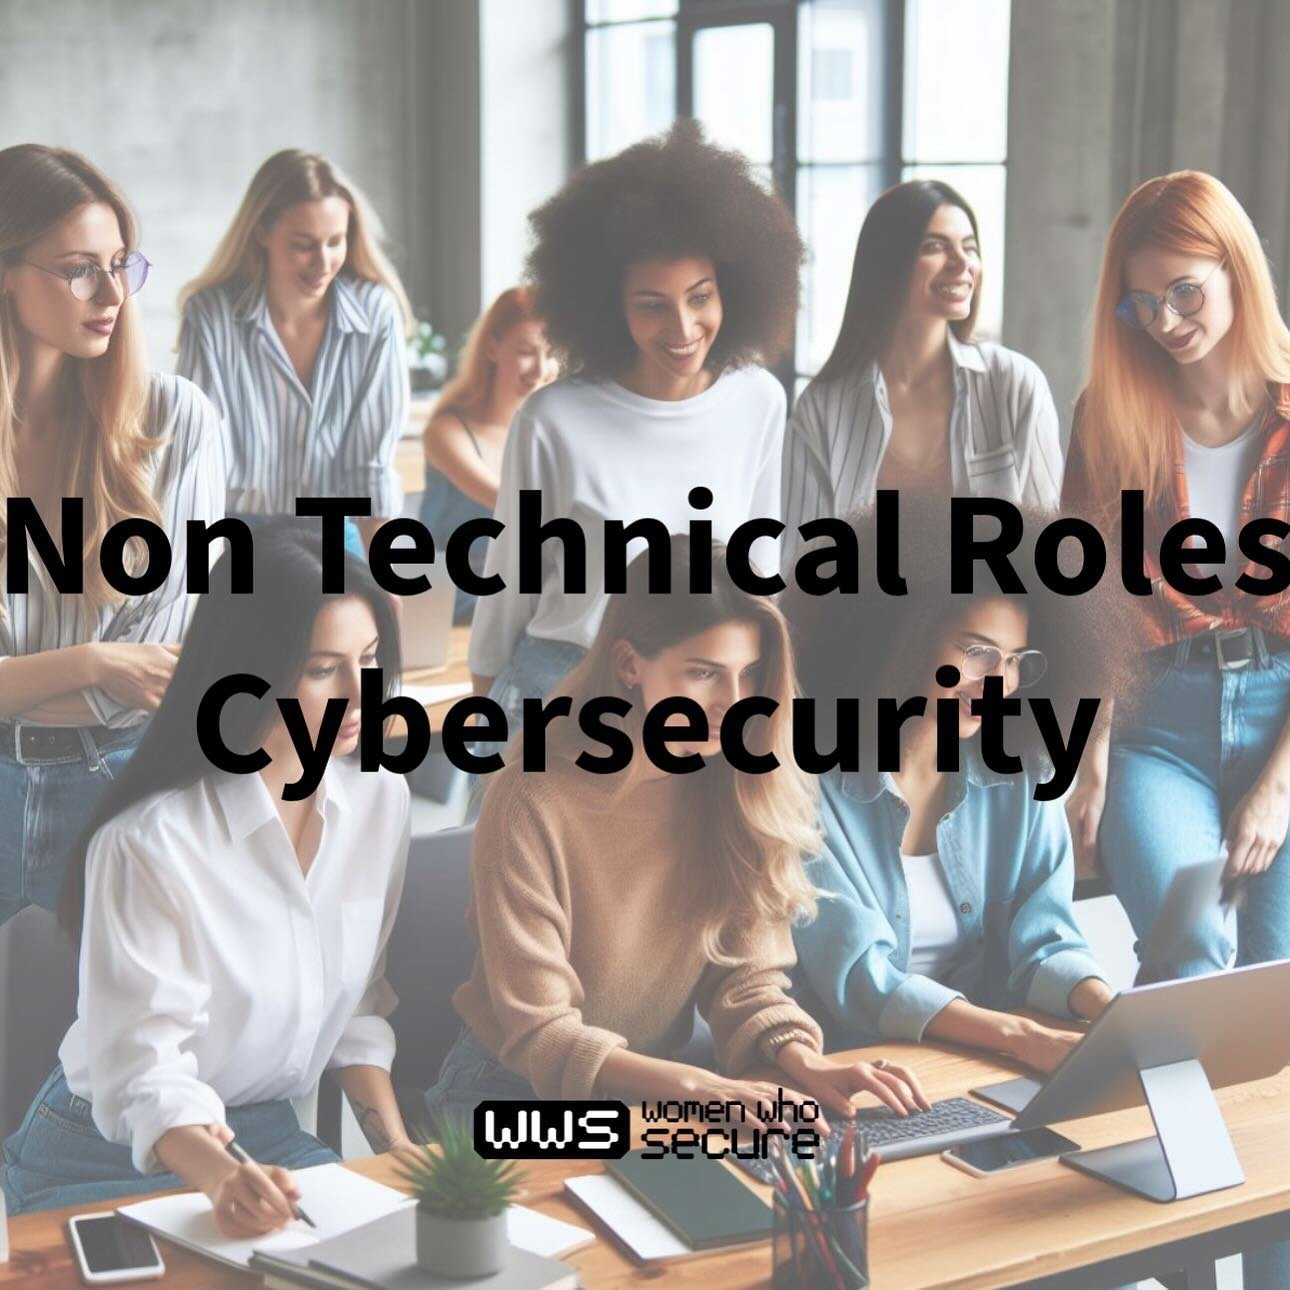 Happy FriYAY!💜

Read our recent article on non technical roles in cybersecurity and tech companies. Learn how to apply the skills you have today and place yourself into a similar role and learn cybersecurity at the same time. Don&rsquo;t get intimat